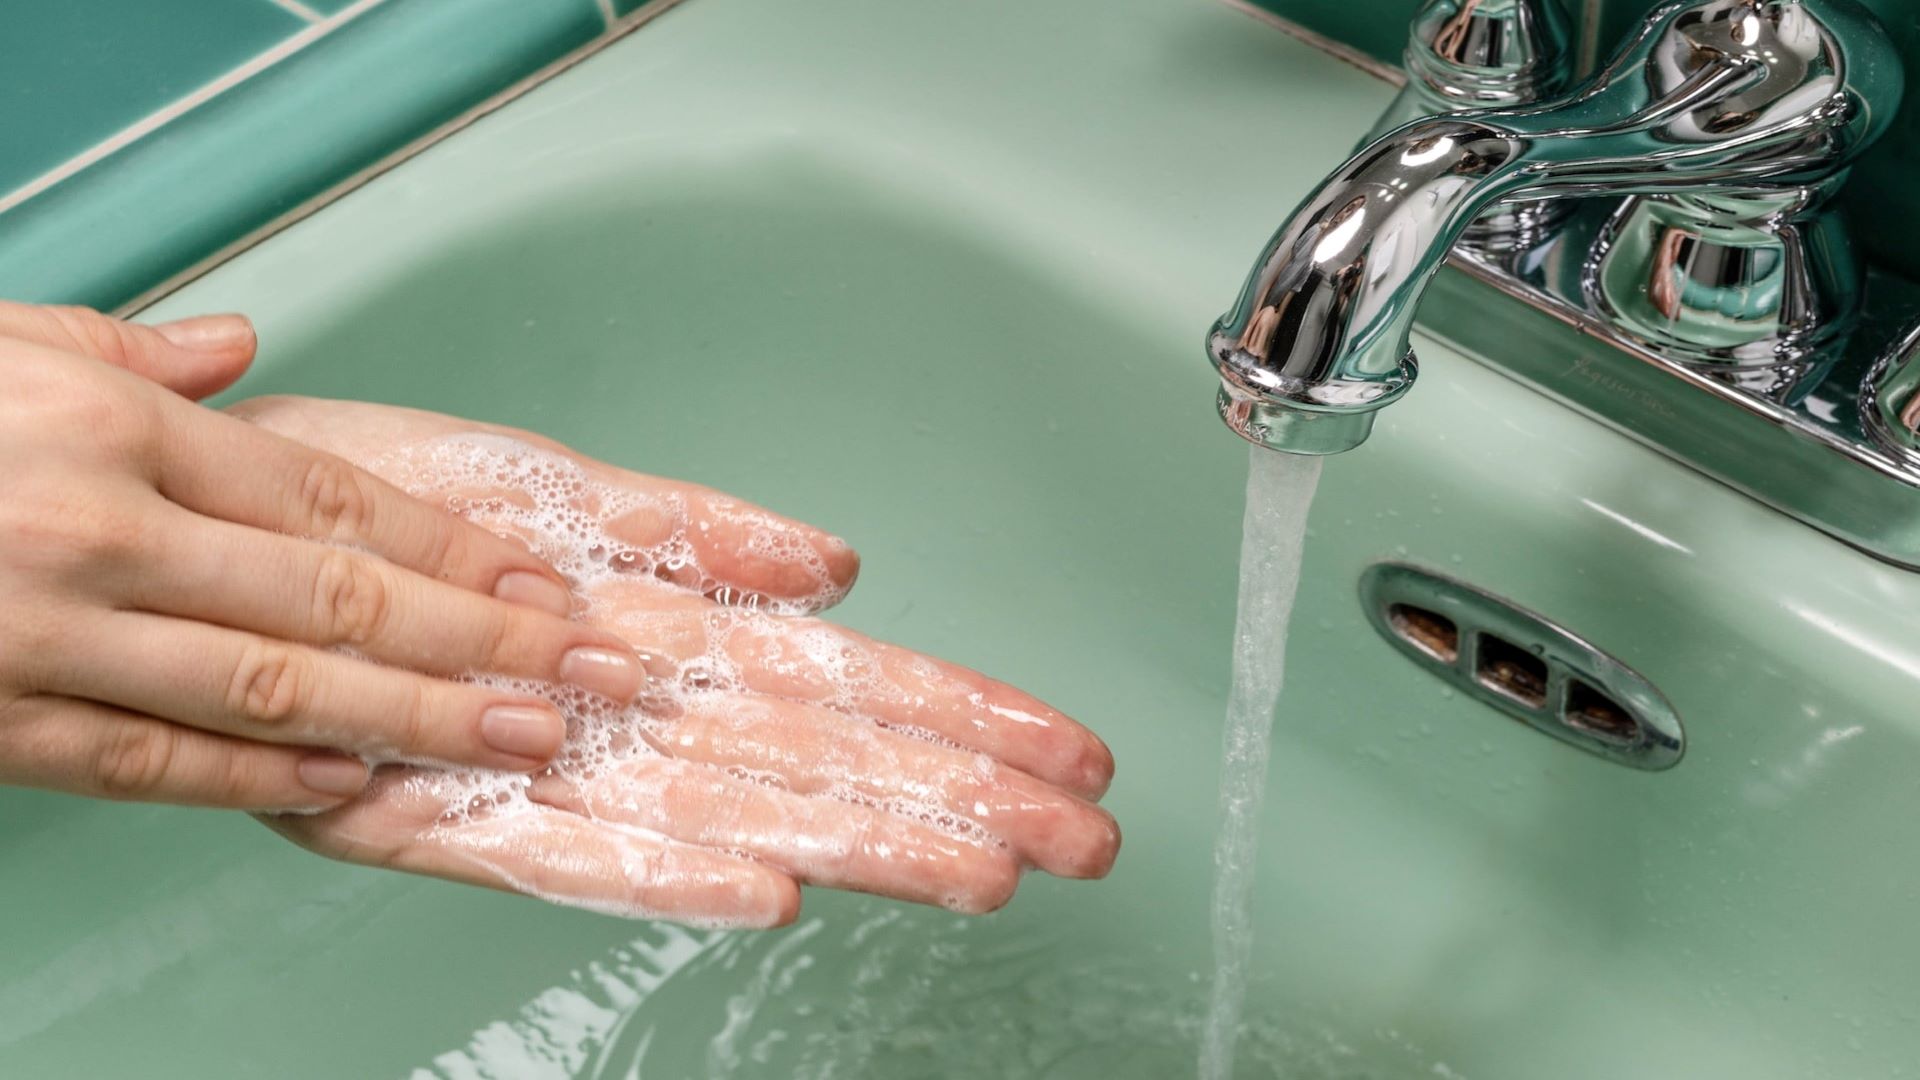 Cleanser being lathered in a pair of hands in a green sink under running water.